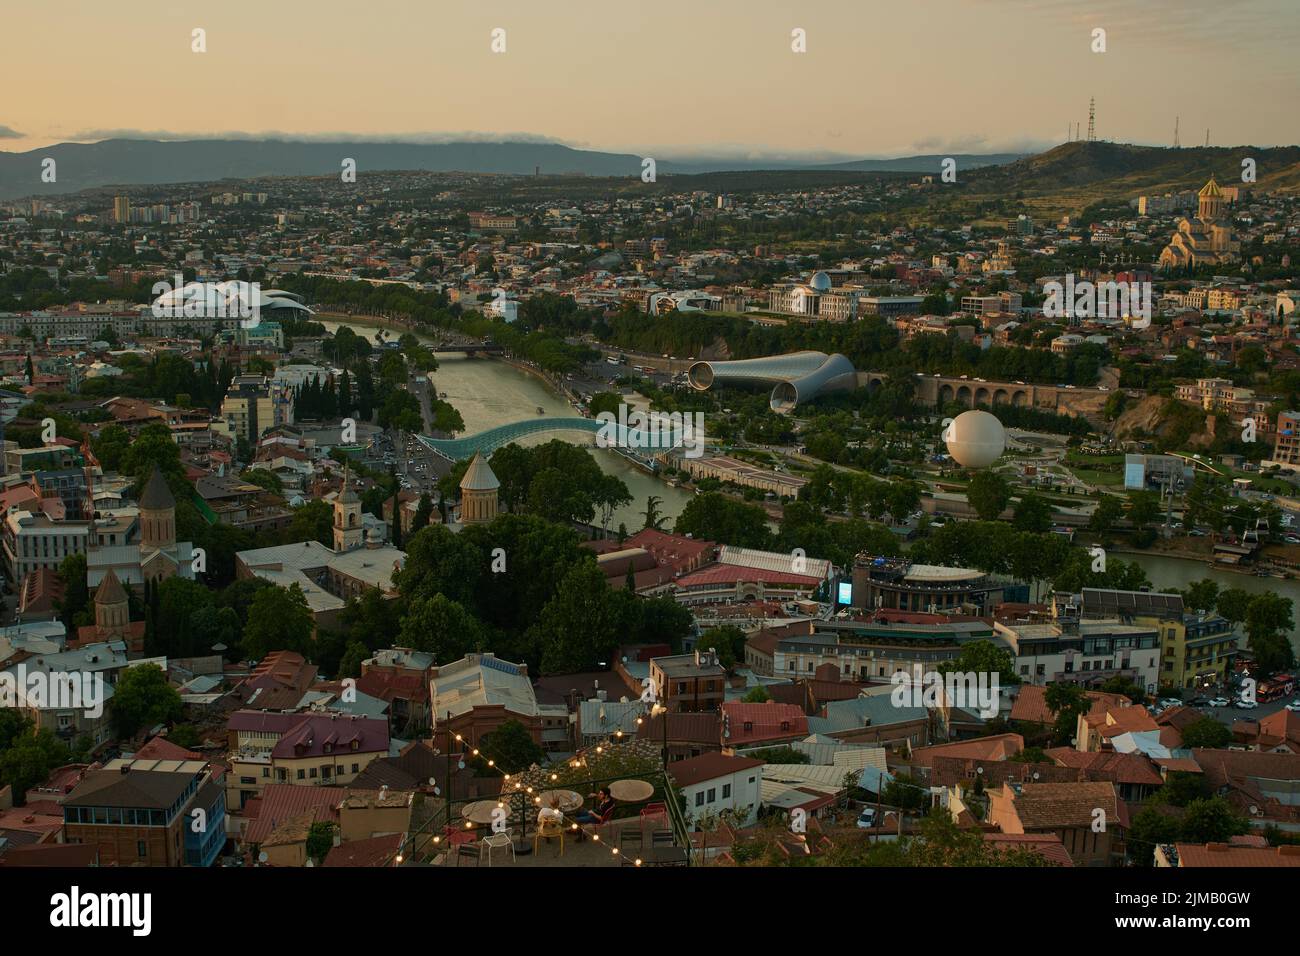 Tbilisi, Georgia sunset Panoramic view from top of fortress of Narikala showing the bridge of peace, Rike Park, Kura River and Holy Trinity Cathedral Stock Photo